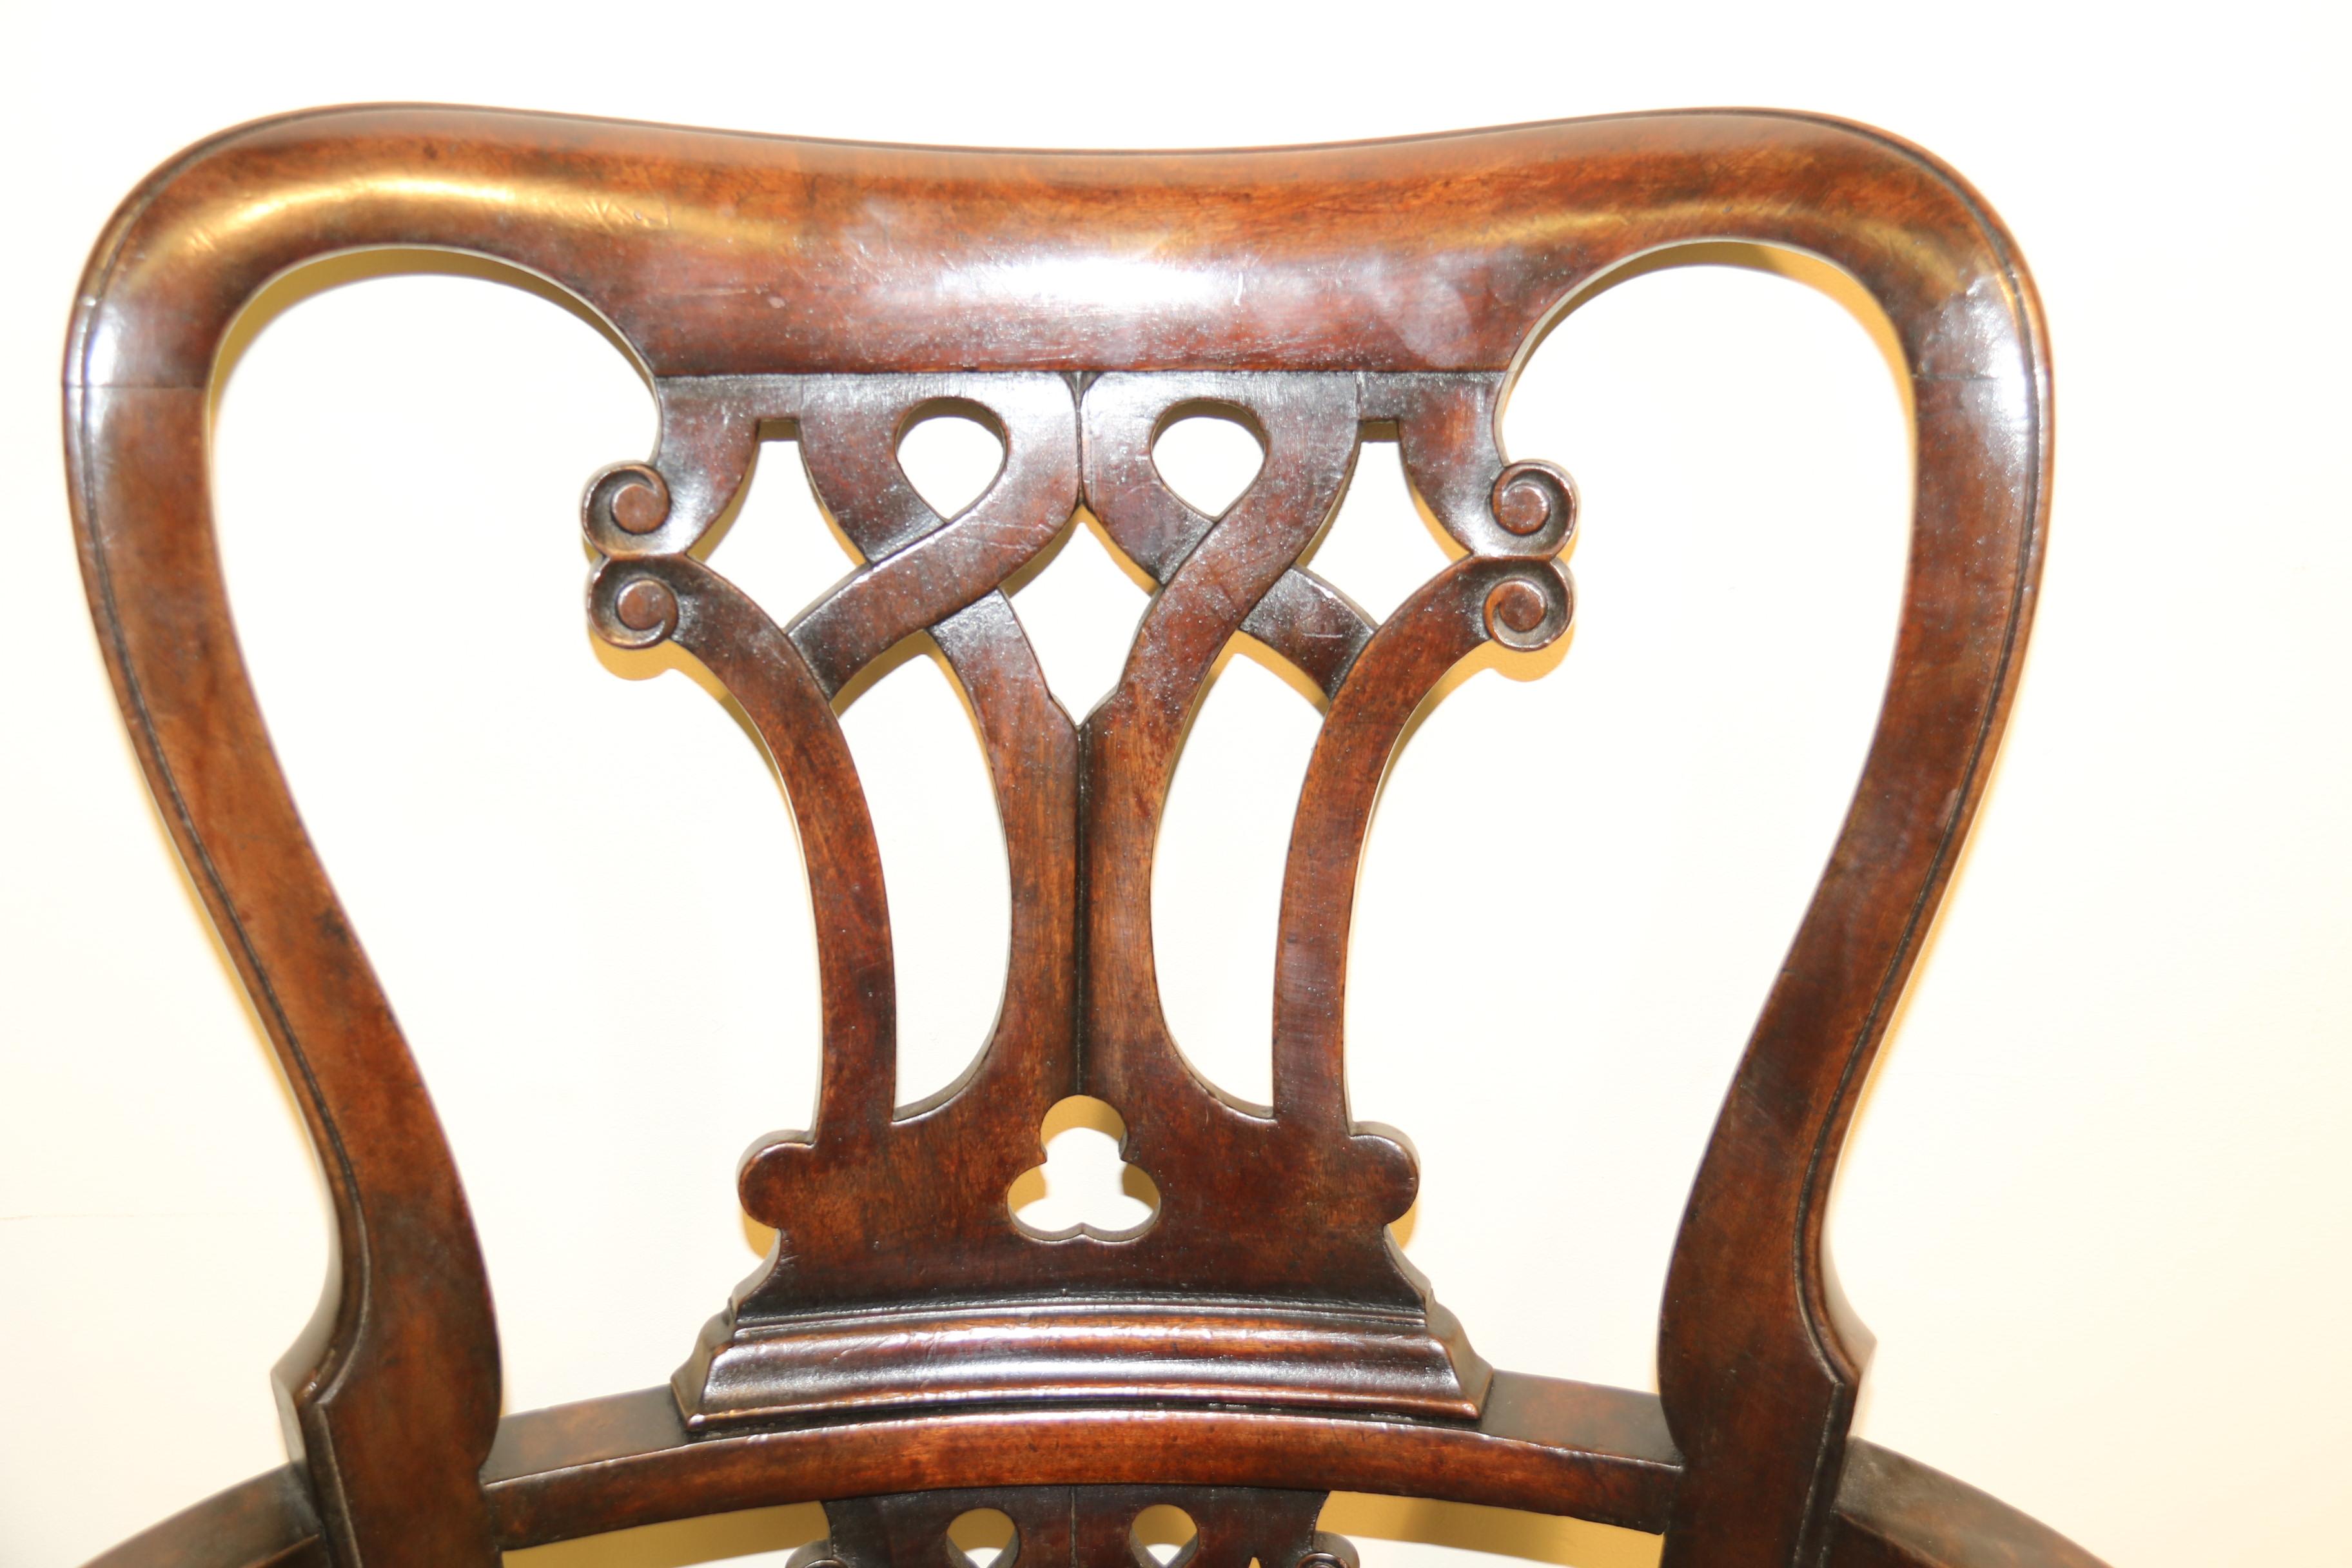 Antique English George II Period Mahogany Windsor Armchair, circa 1750 For Sale 3